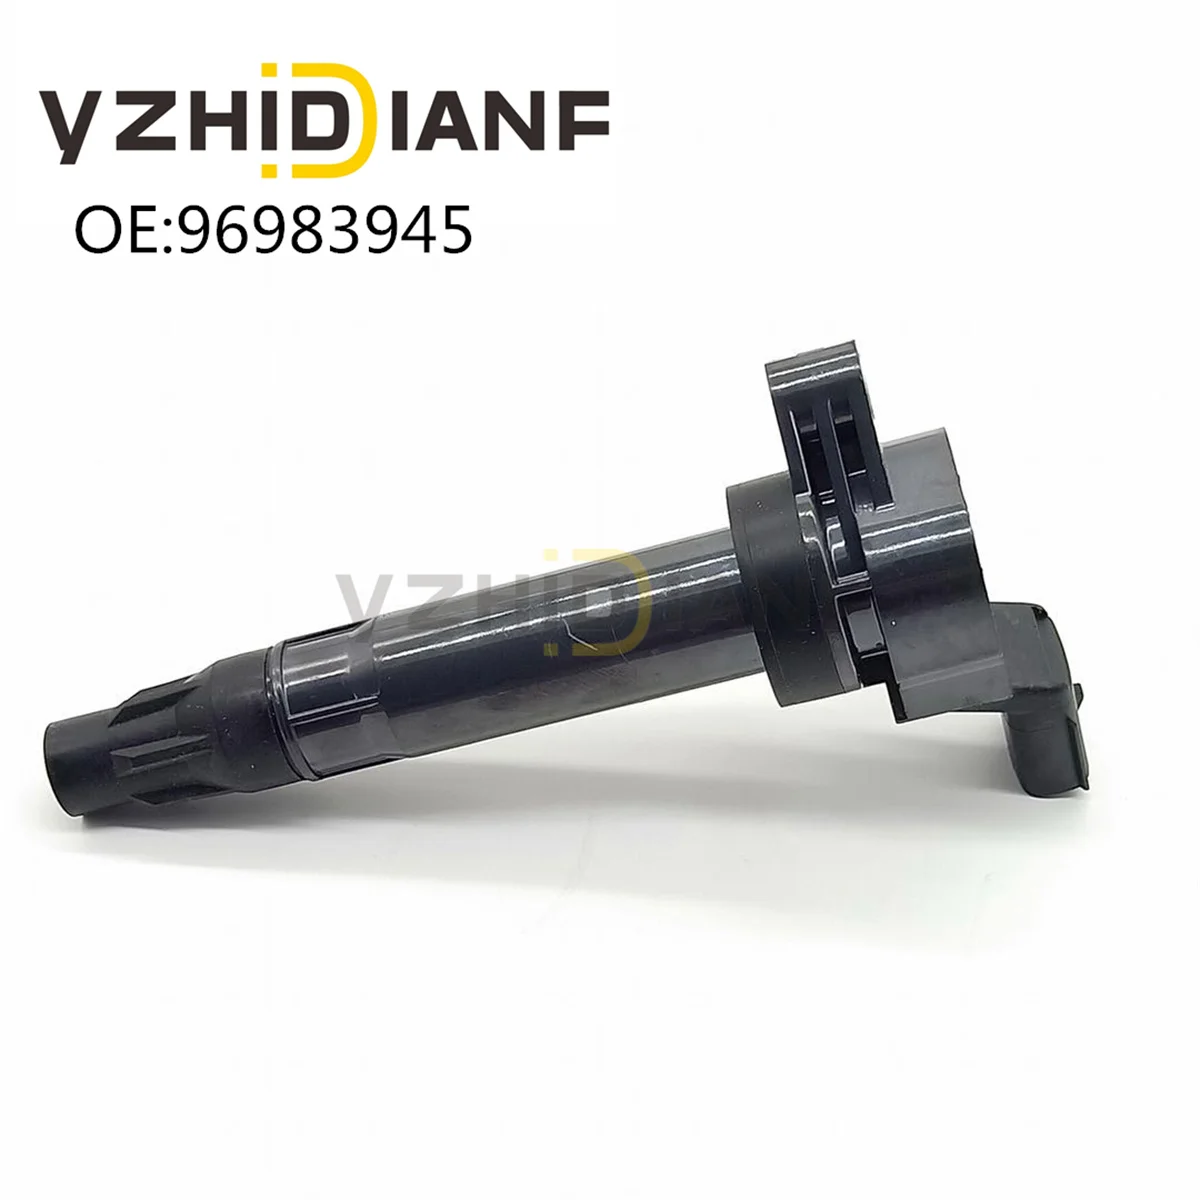 

1x Ignition Coil FOR 13-15 Chevrolet- Spark- 1.2L-L4 C1846 25190788 96983945 5C1903 9023781 FK0374 A0991600089 UF725 UF-725